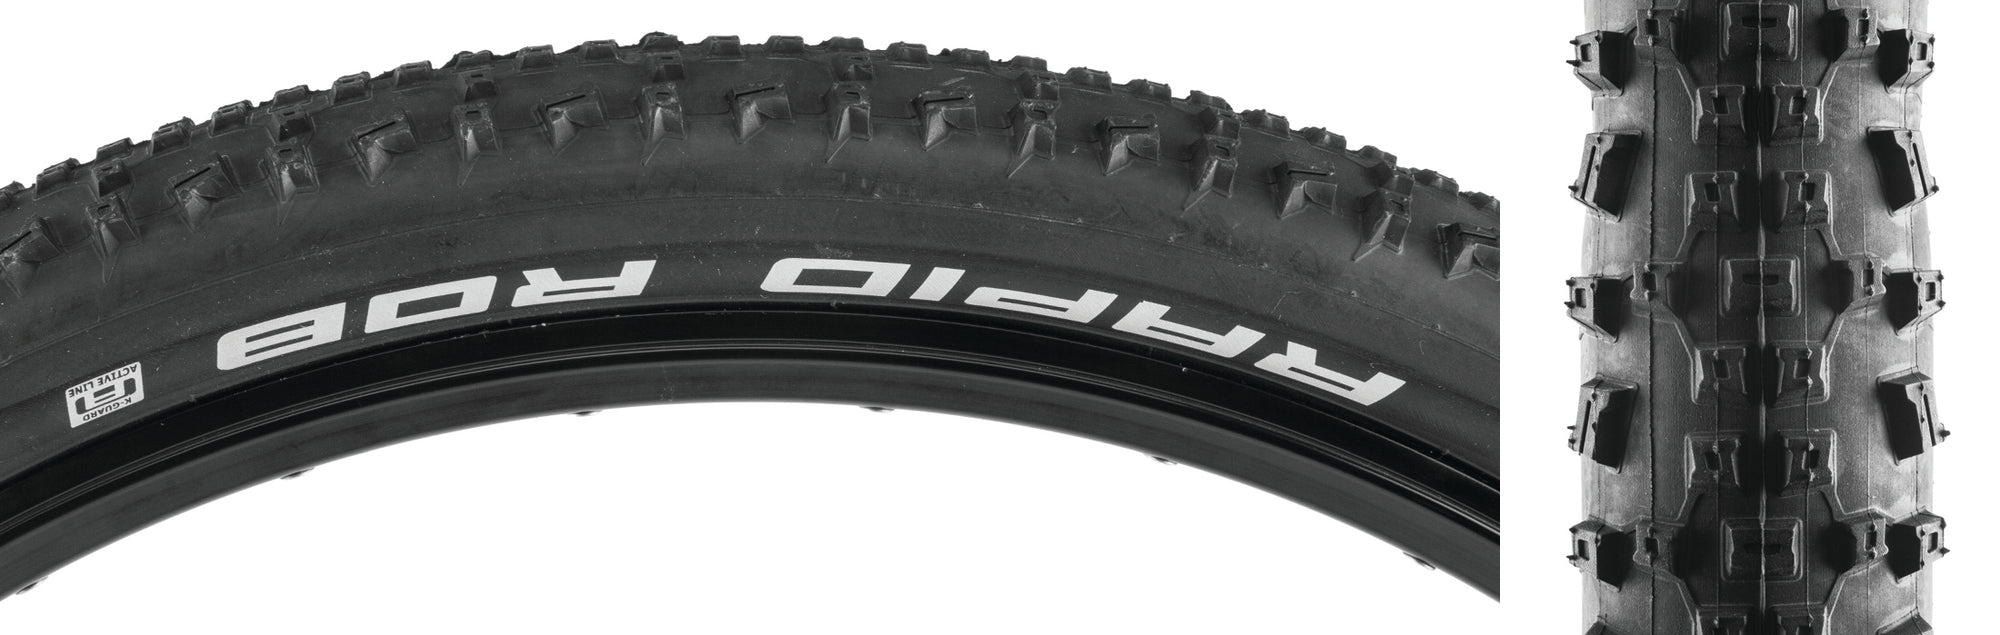 Schwalbe Rapid Rob Tire - 26 x 2.1 - Downtown Bicycle Works 